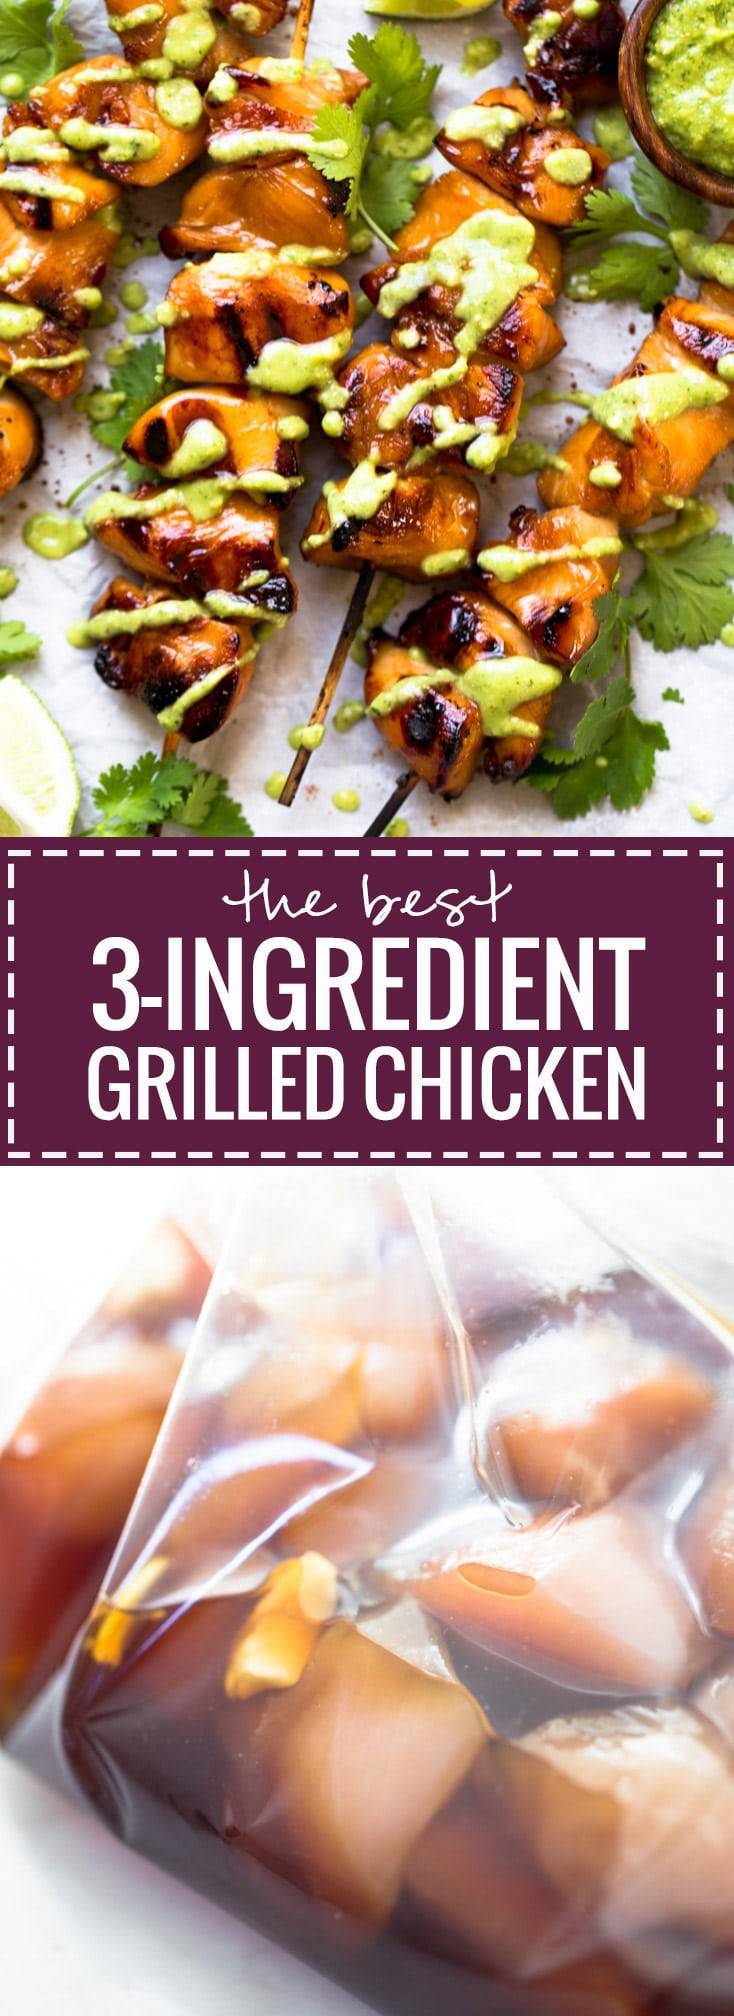 3 Ingredient Grilled Chicken recipe - with soy sauce, honey, and garlic. So easy and super adaptable! 200 calories. | pinchofyum.com